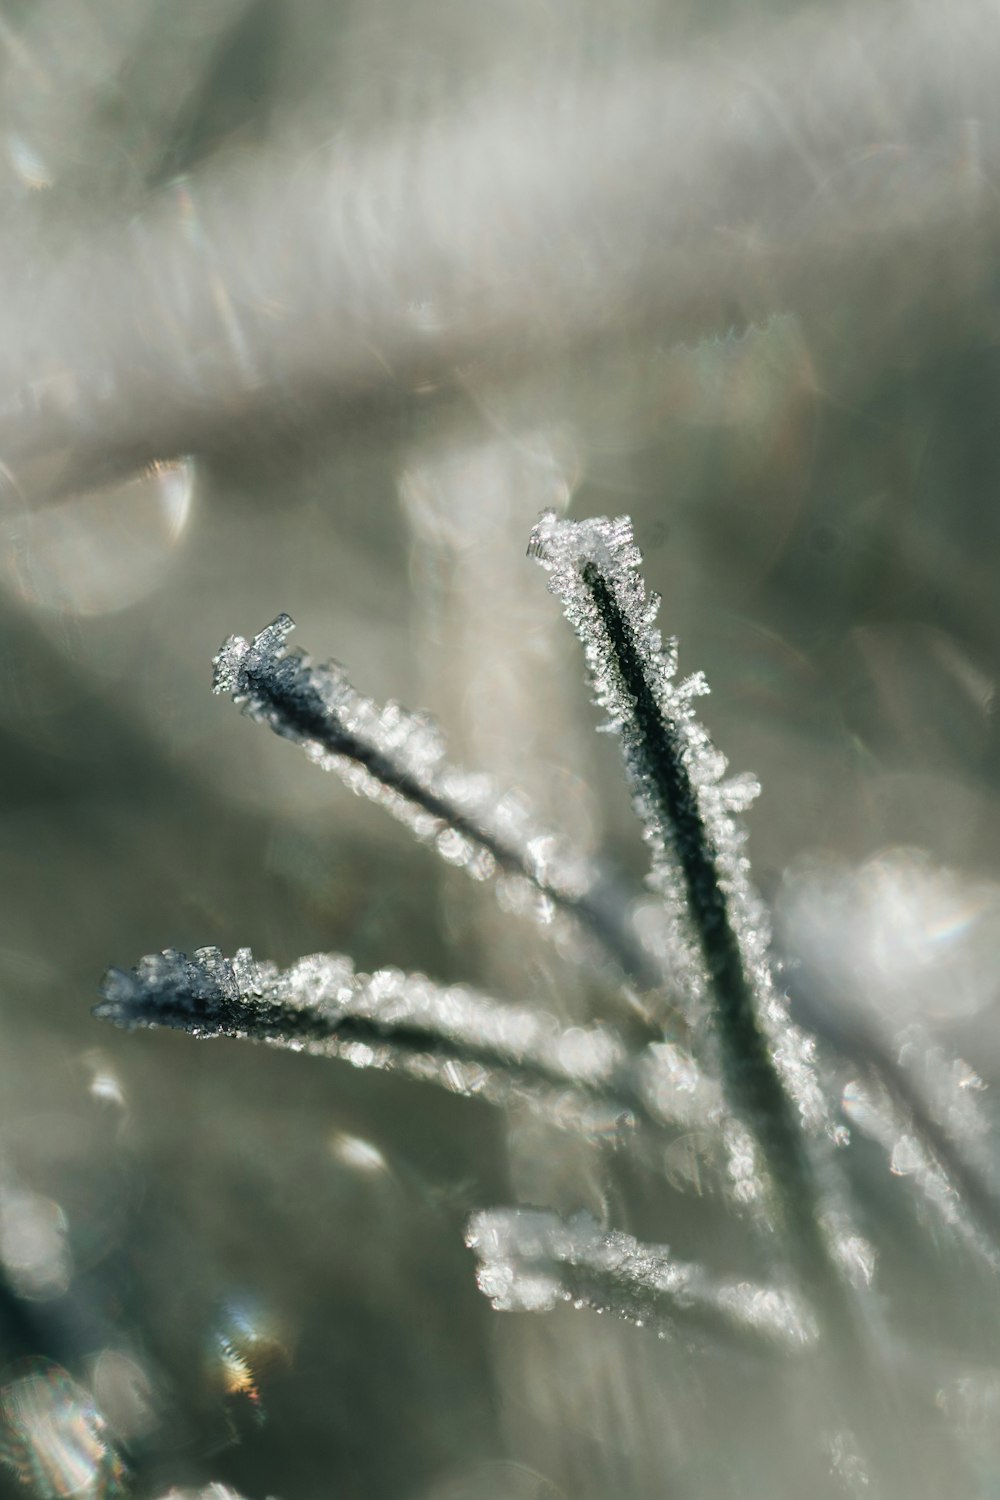 a close up of a plant with ice on it